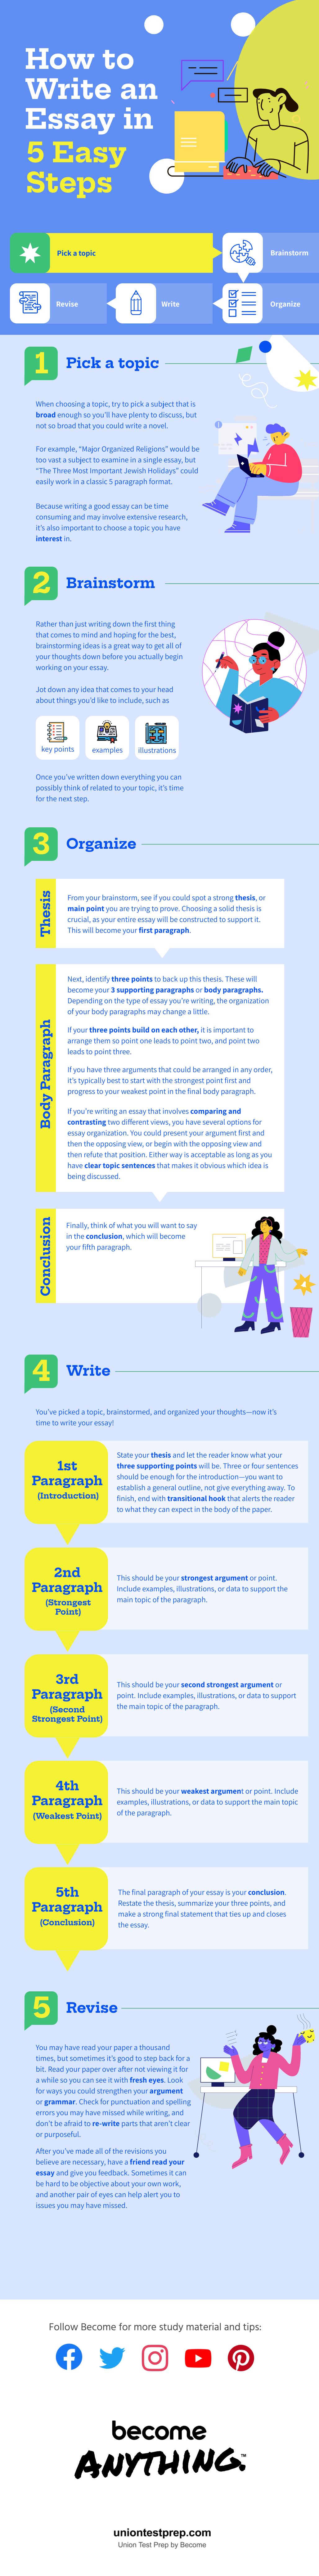 How to write an awesome essay in 5 steps